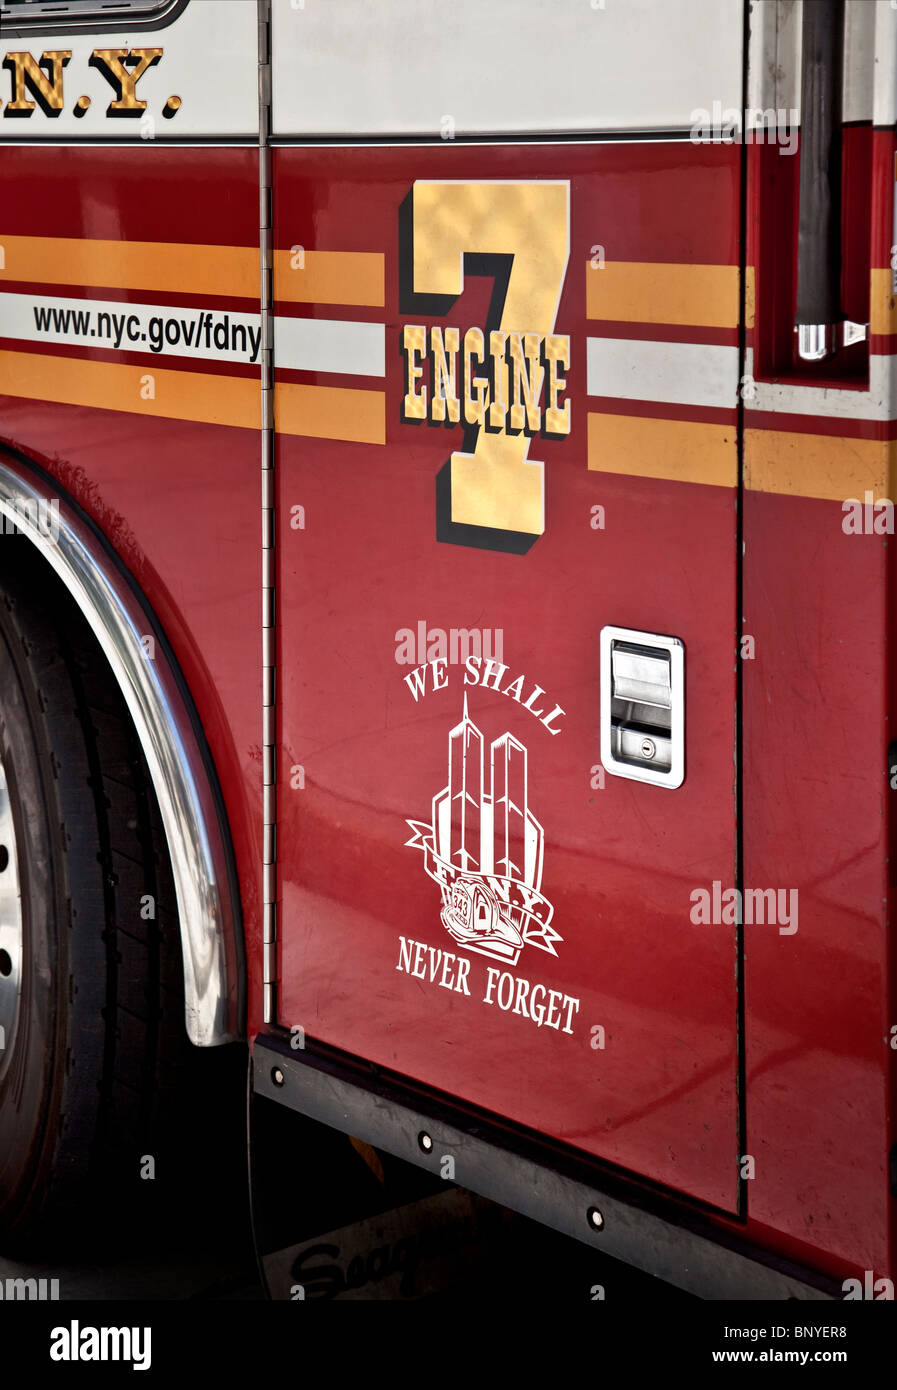 FDNY fire engine with 9/11 message Stock Photo